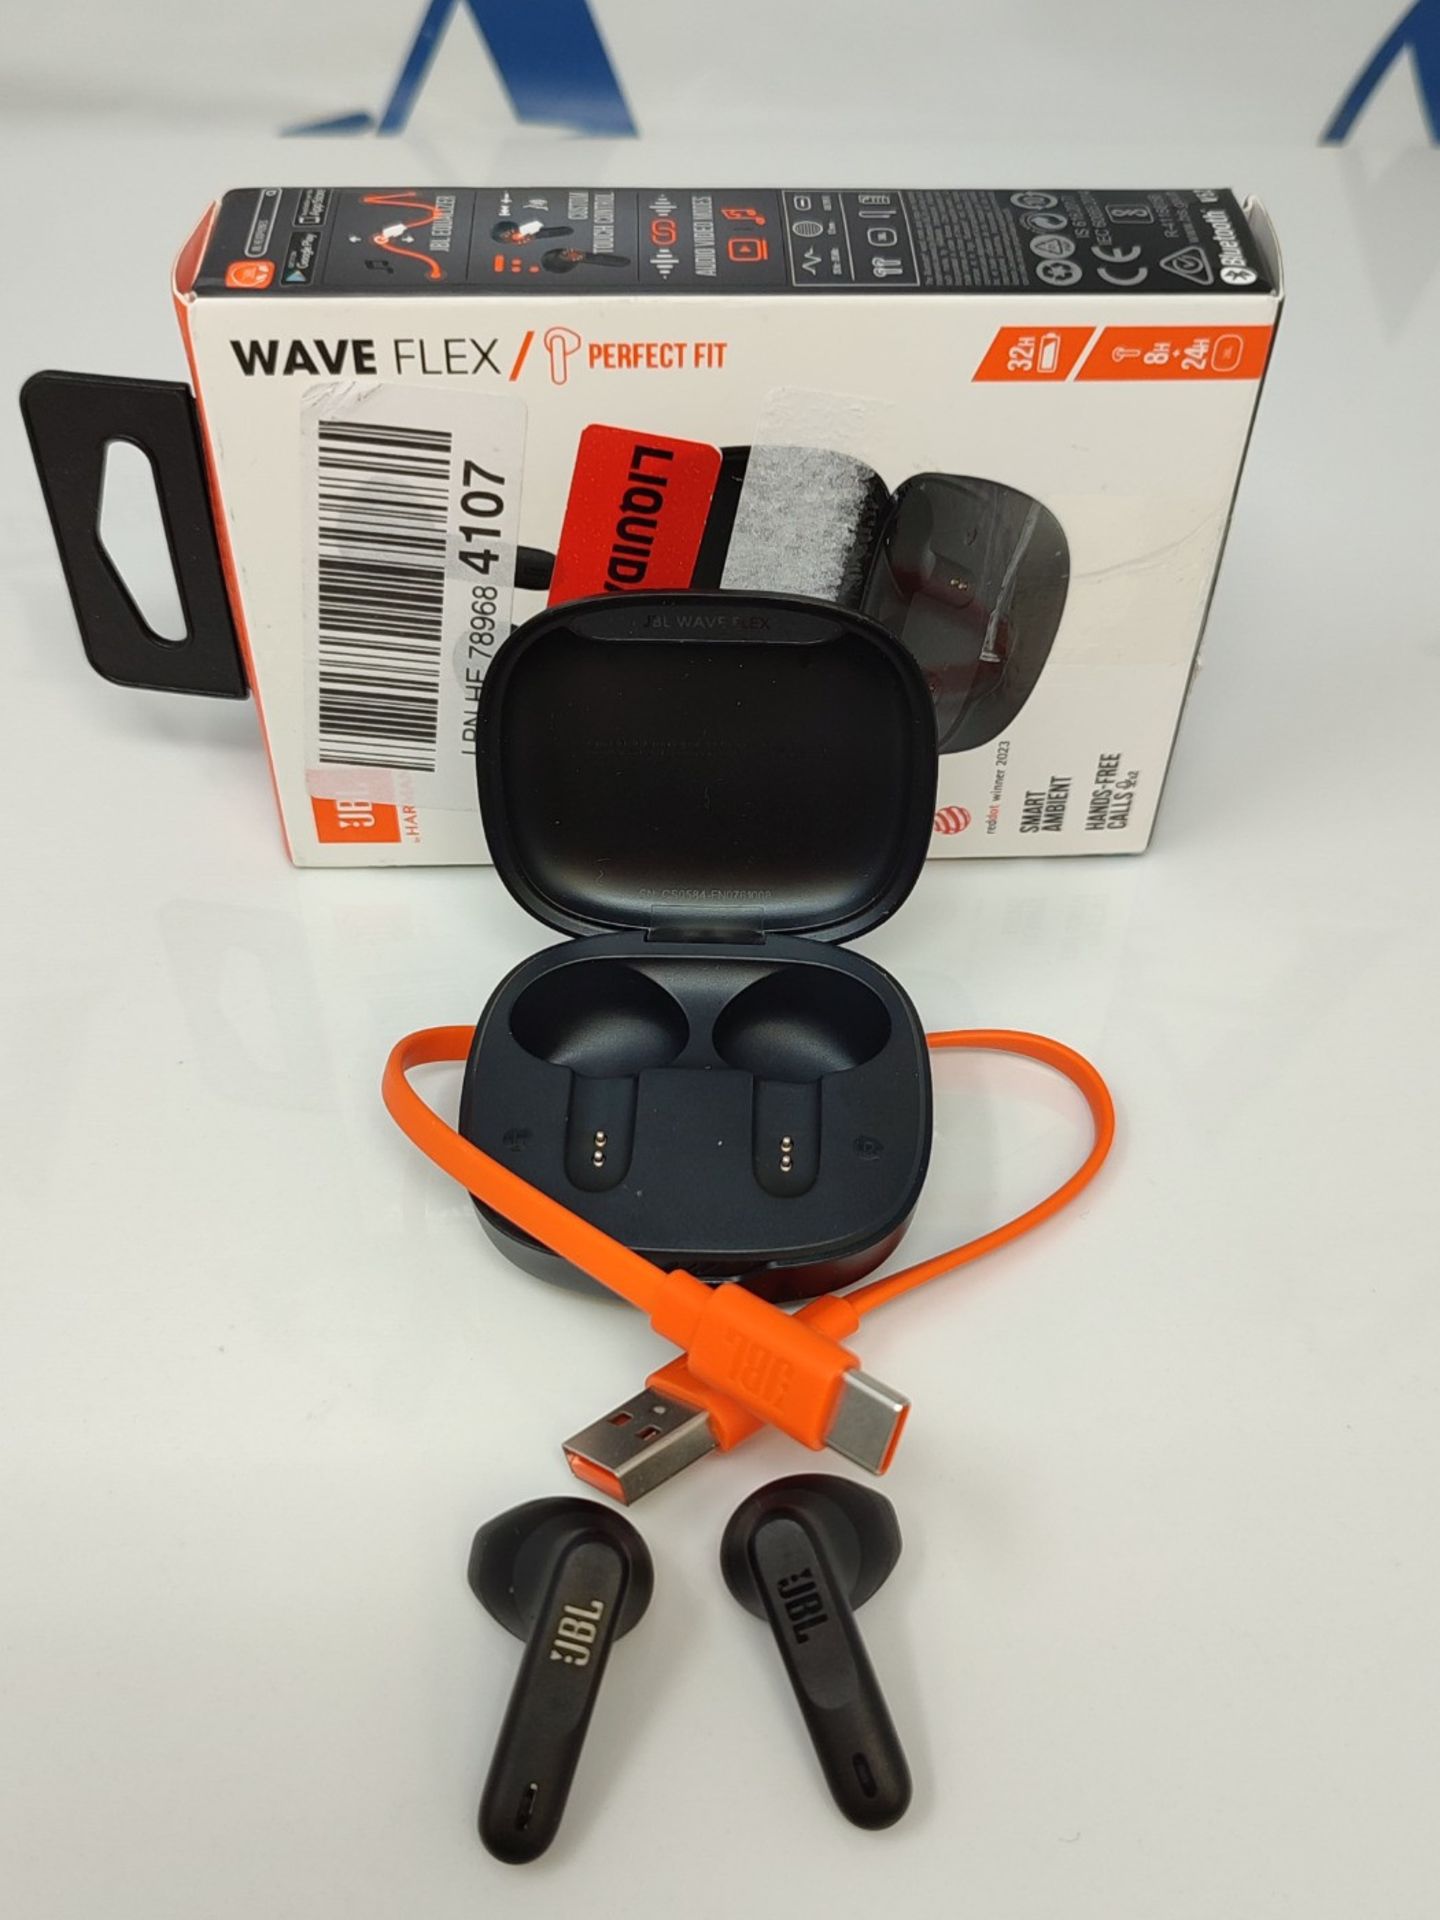 RRP £62.00 JBL Wave Flex - Wireless in-ear headphones with IP54 and IPX2 water resistance - TalkT - Image 3 of 3